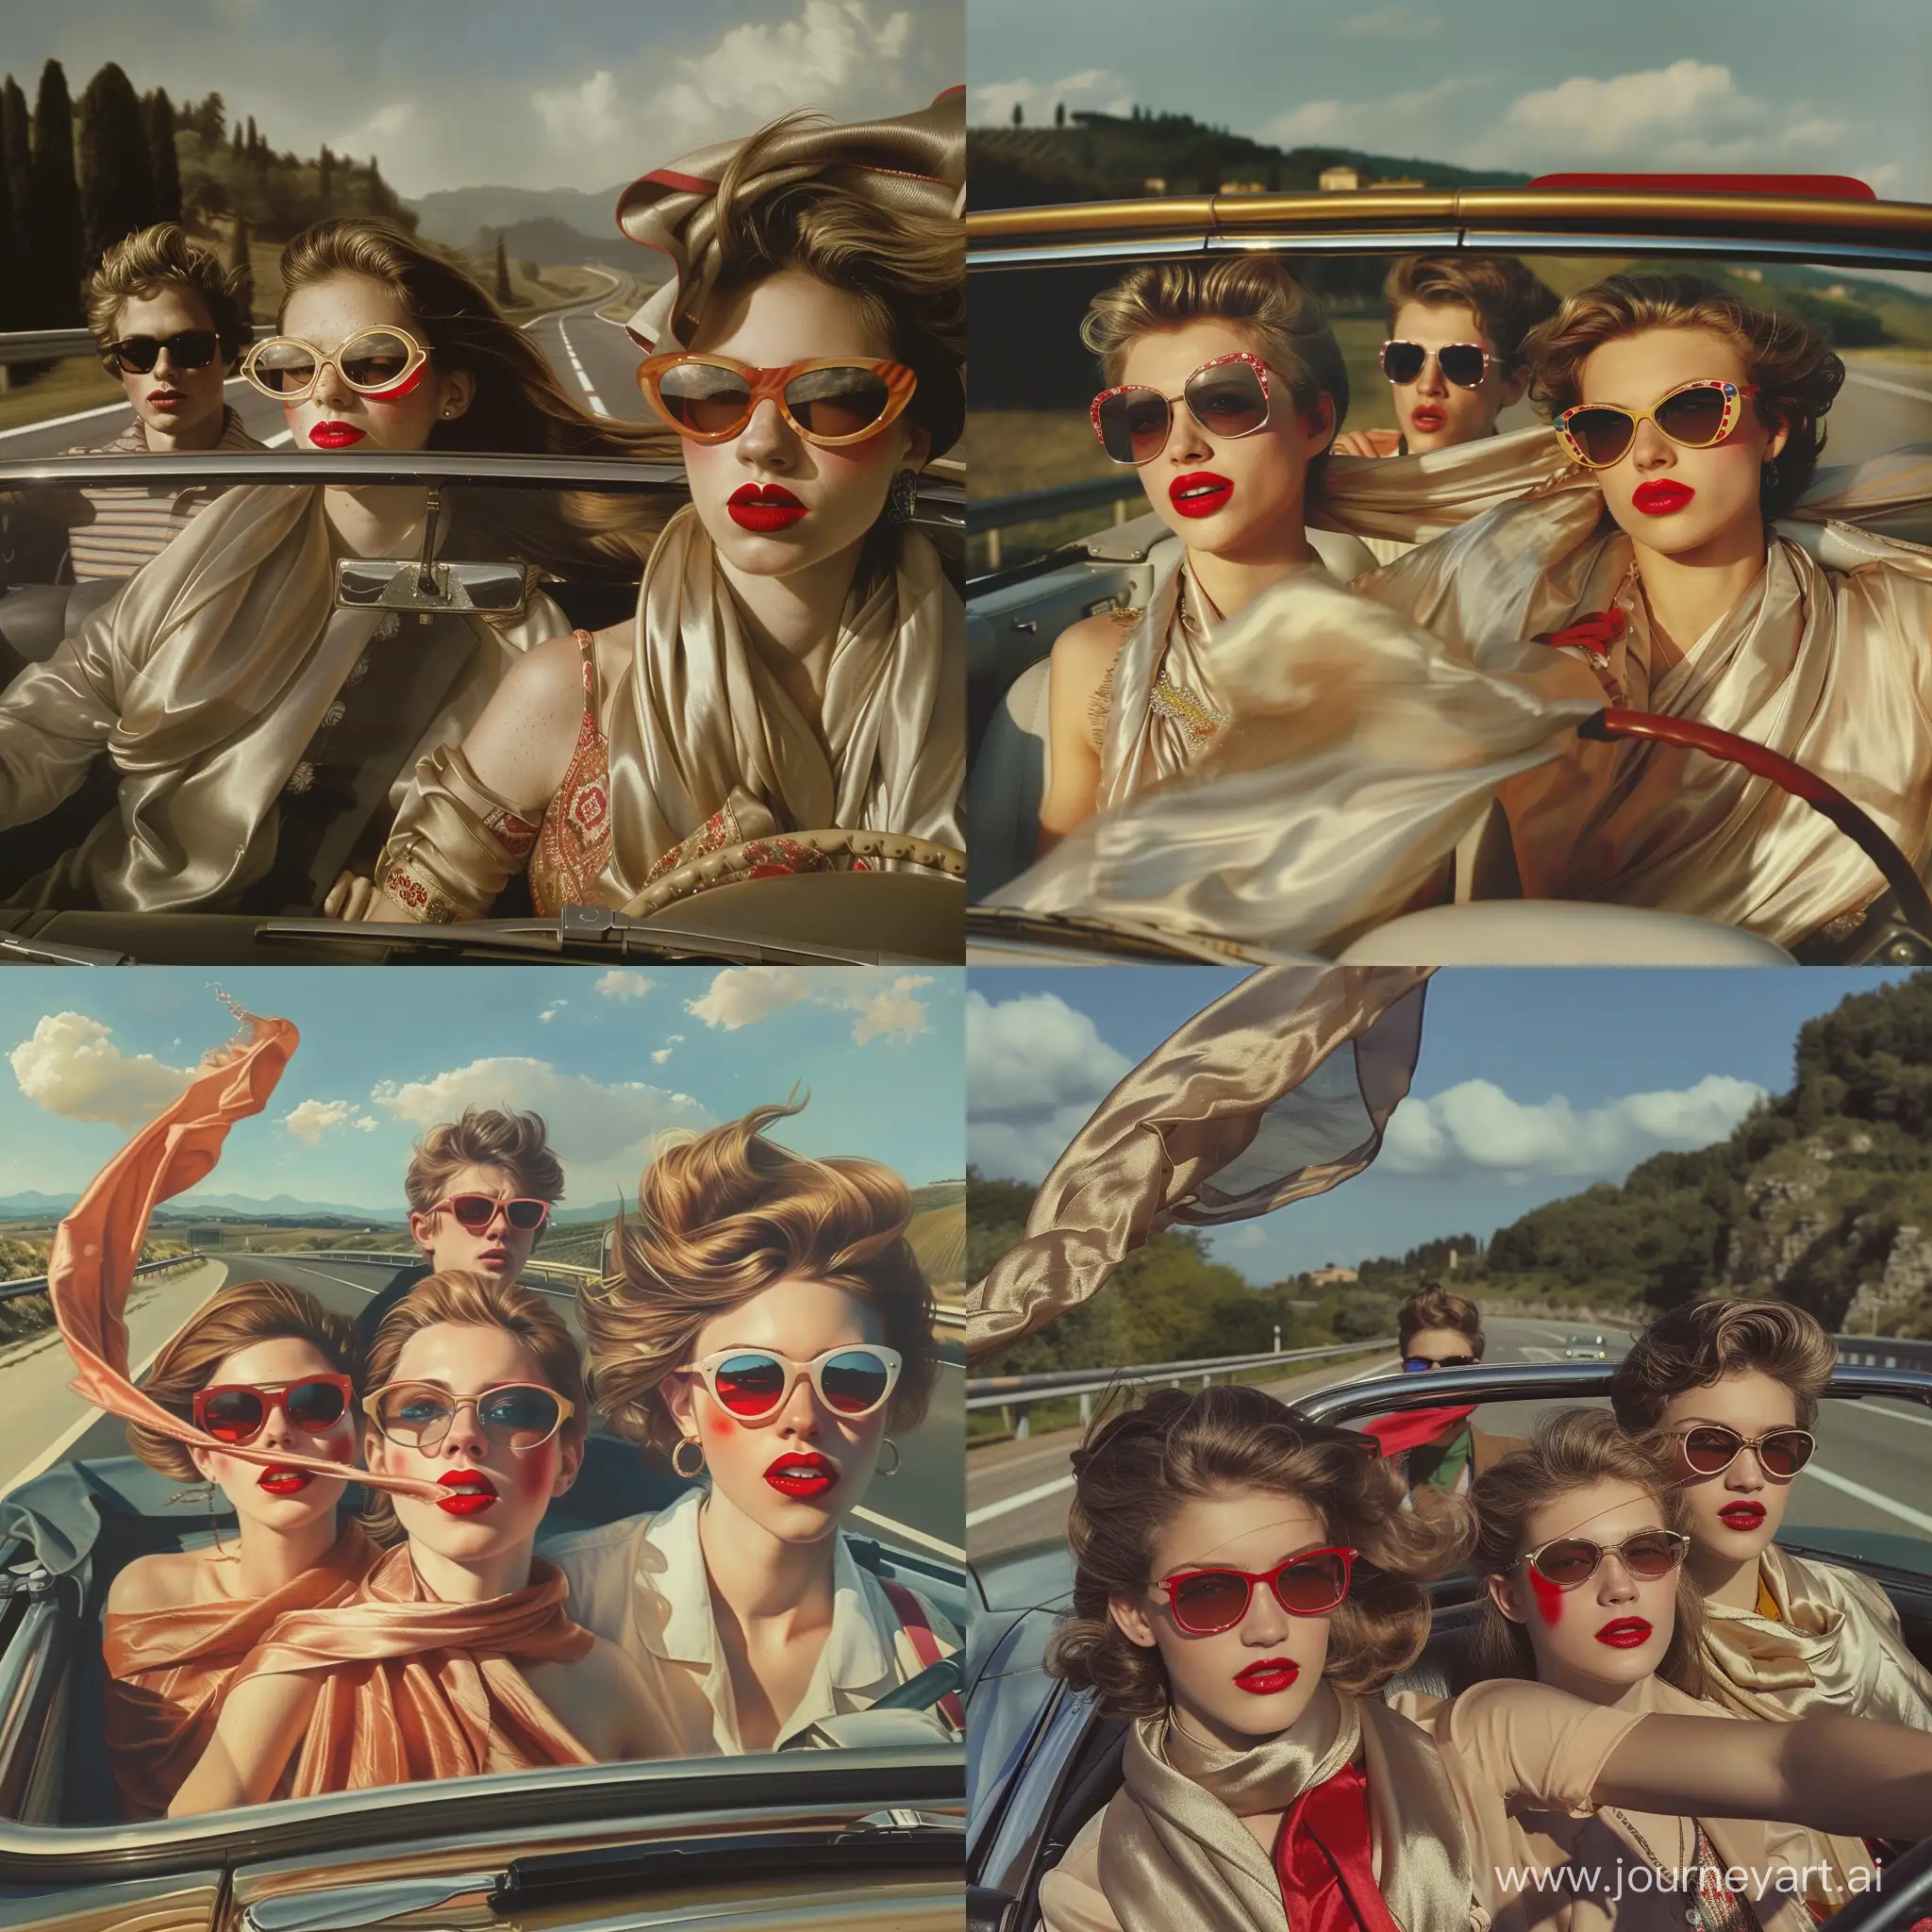 Stylish-Women-and-Man-Enjoying-a-Road-Trip-in-Tuscany-Convertible-Adventure